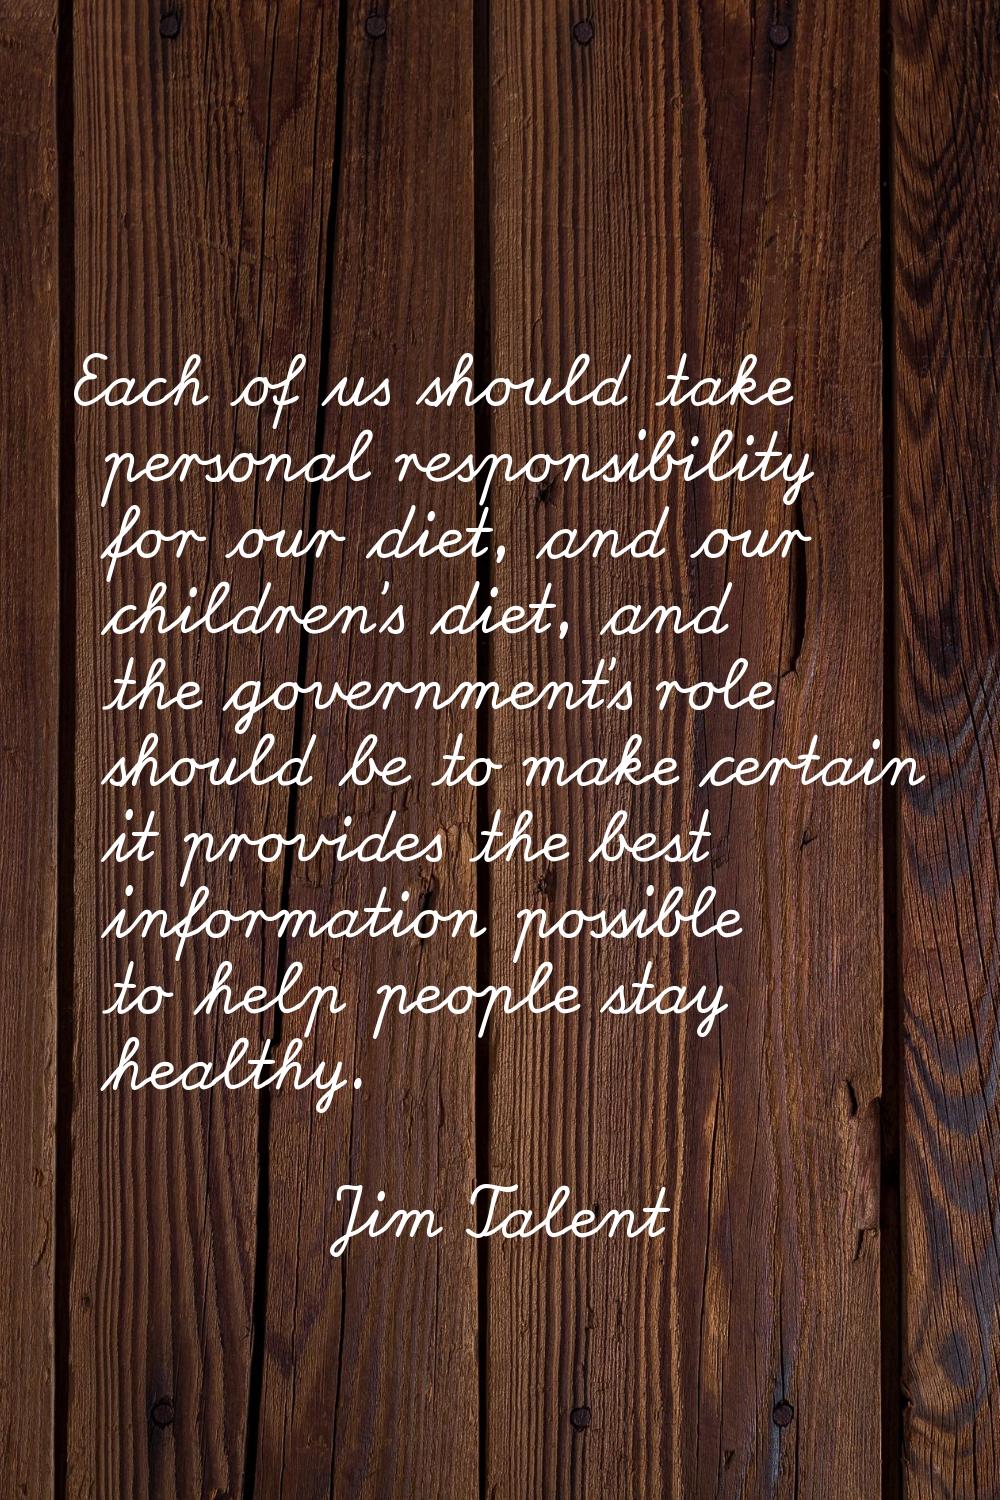 Each of us should take personal responsibility for our diet, and our children's diet, and the gover